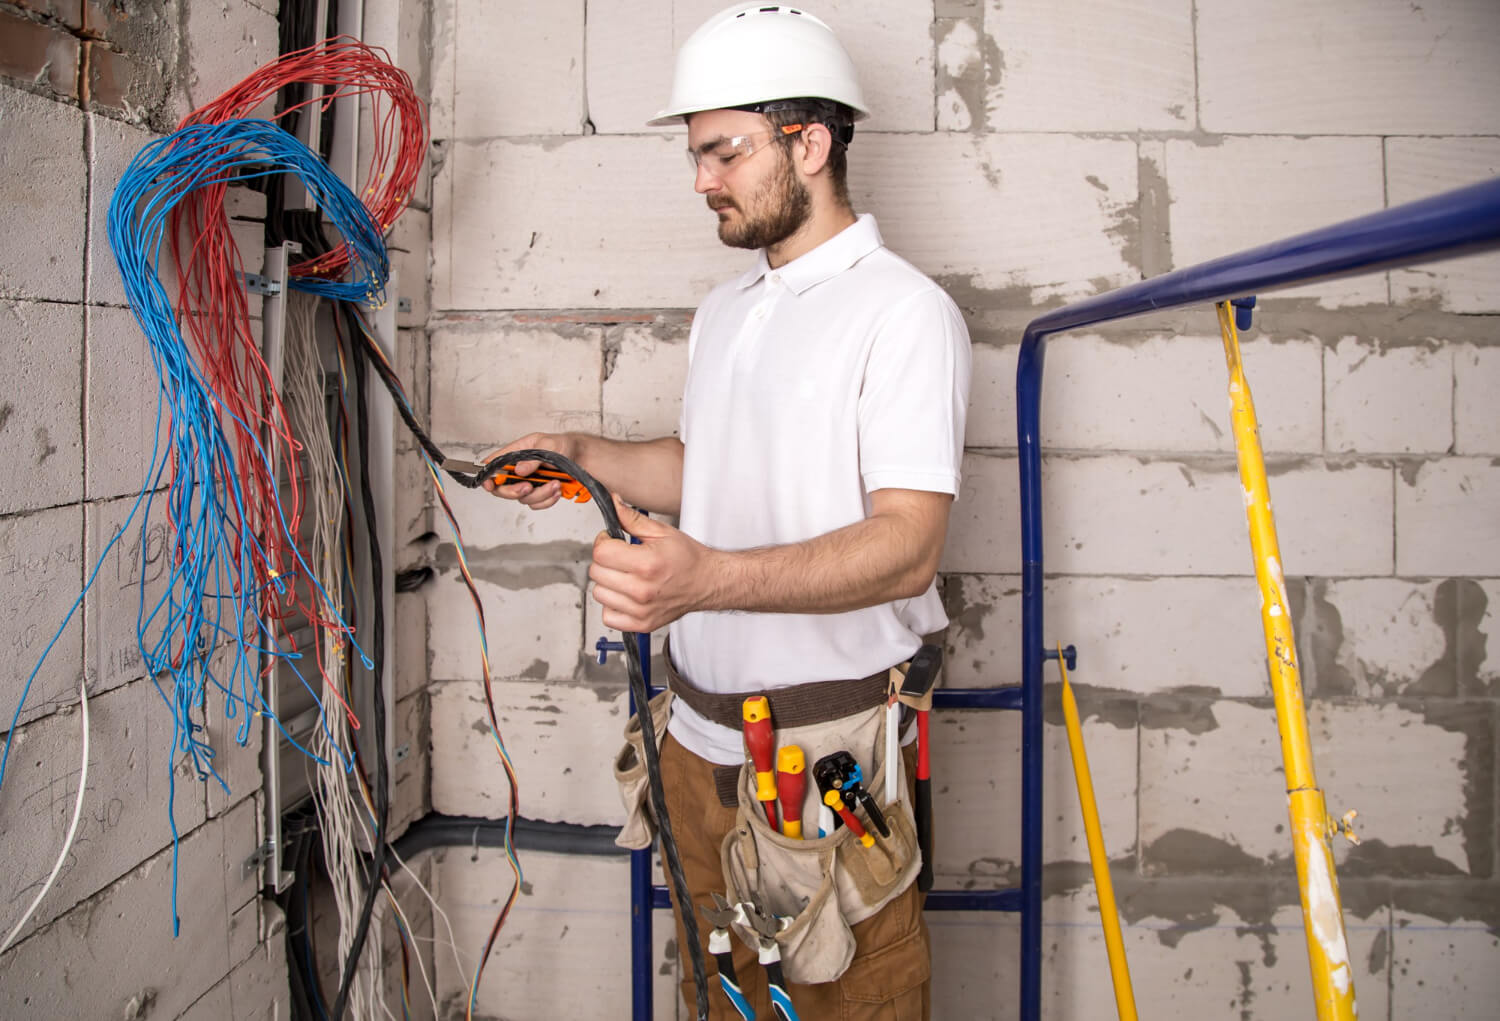 electrician-working-near-board-with-wires-installation-connection-electrics (1)